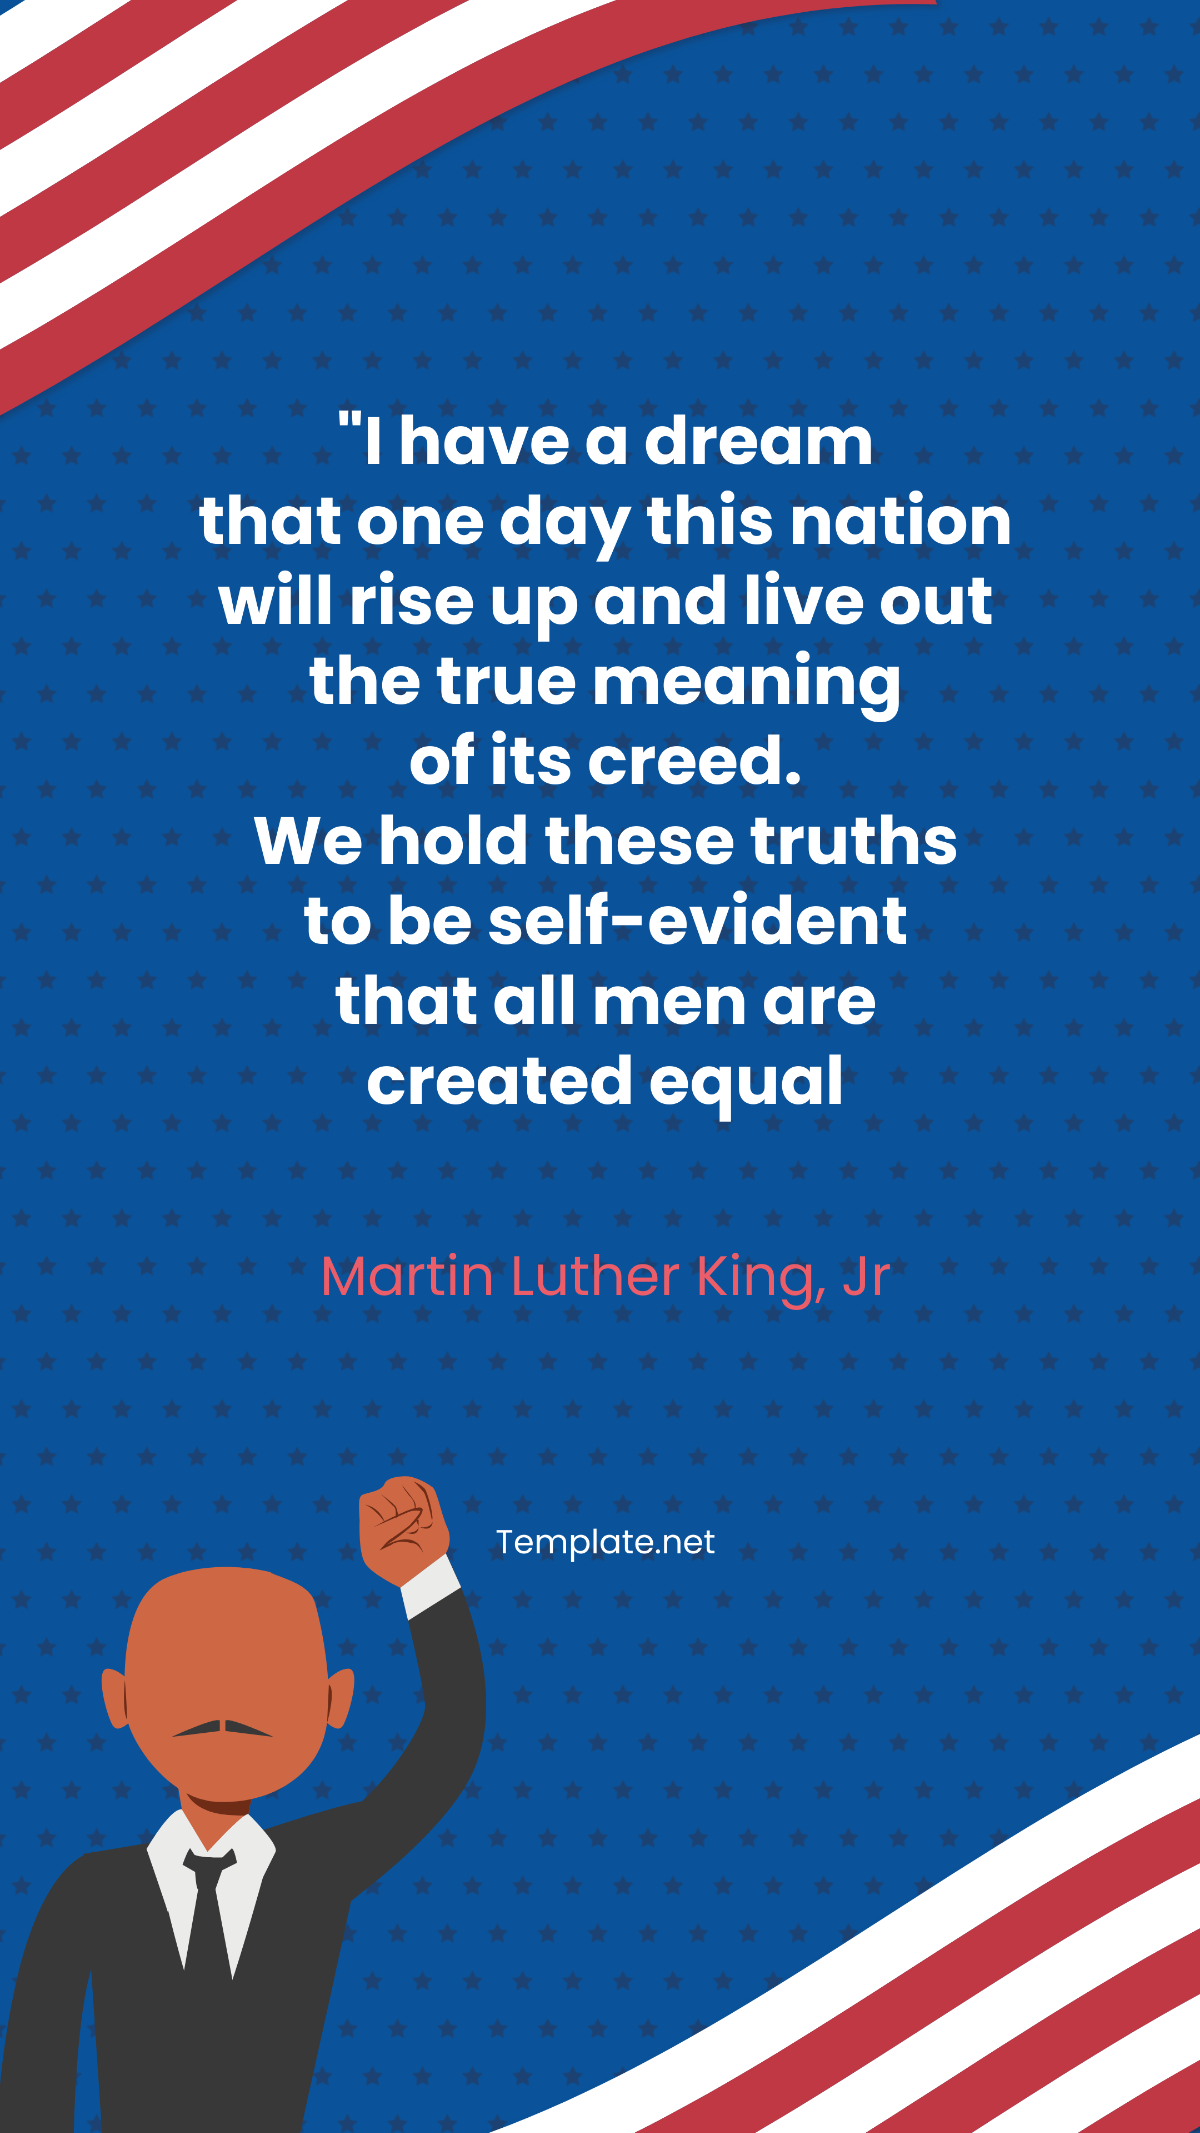 Martin Luther King Famous Quotes Template